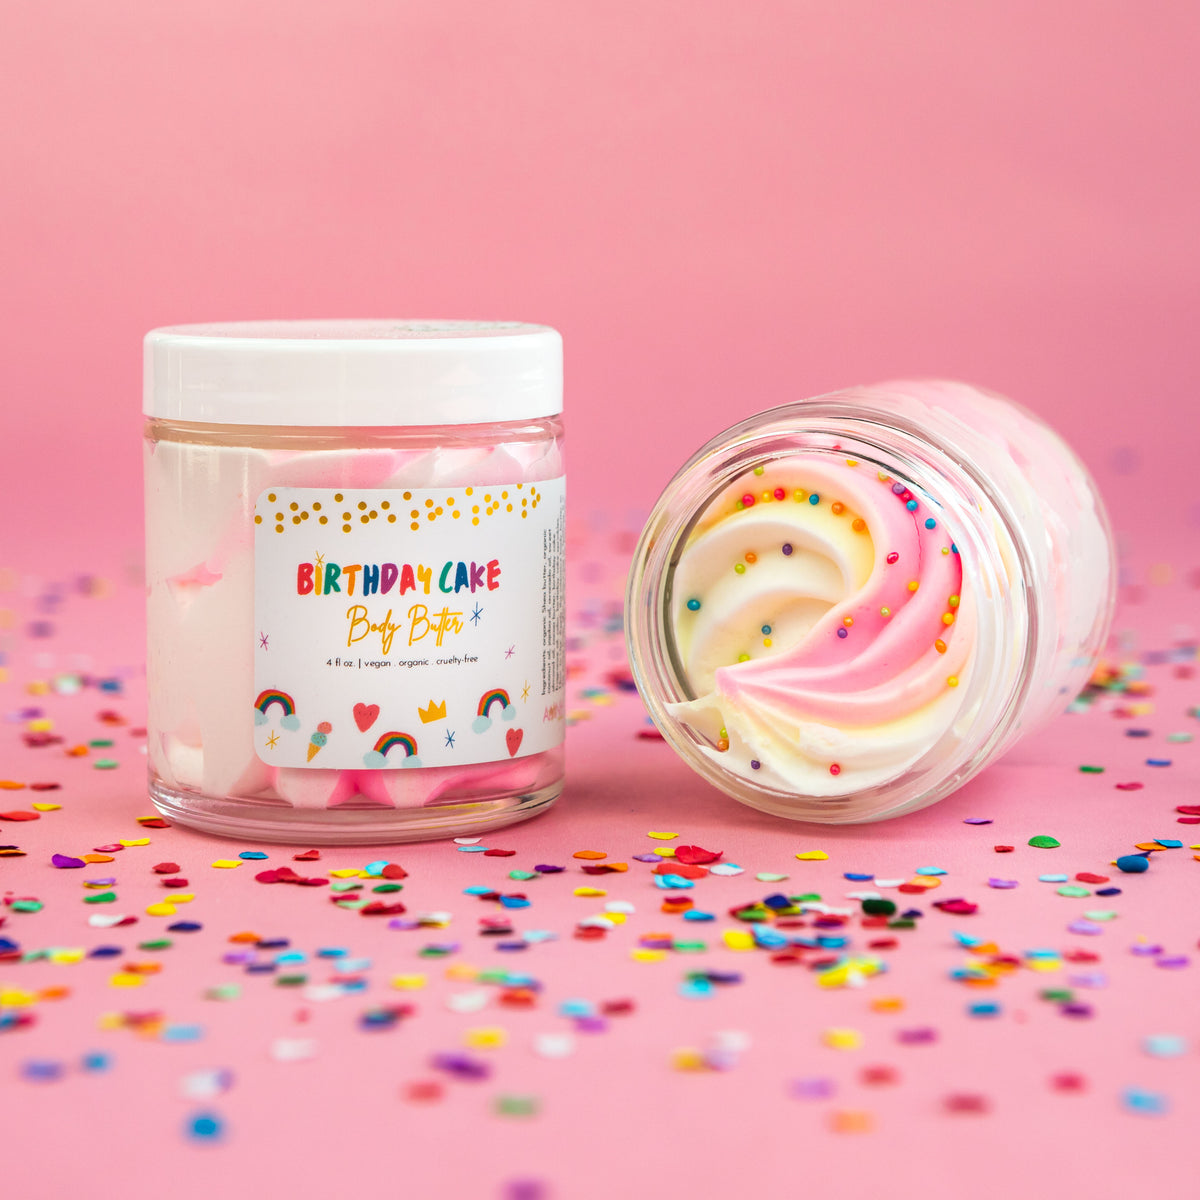 Enjoy this 4 oz jar of Birthday Cake Body Butter that is organic, vegan, and cruelty free for your bath time pleasure! You&#39;ll feel like it&#39;s your birthday with every use